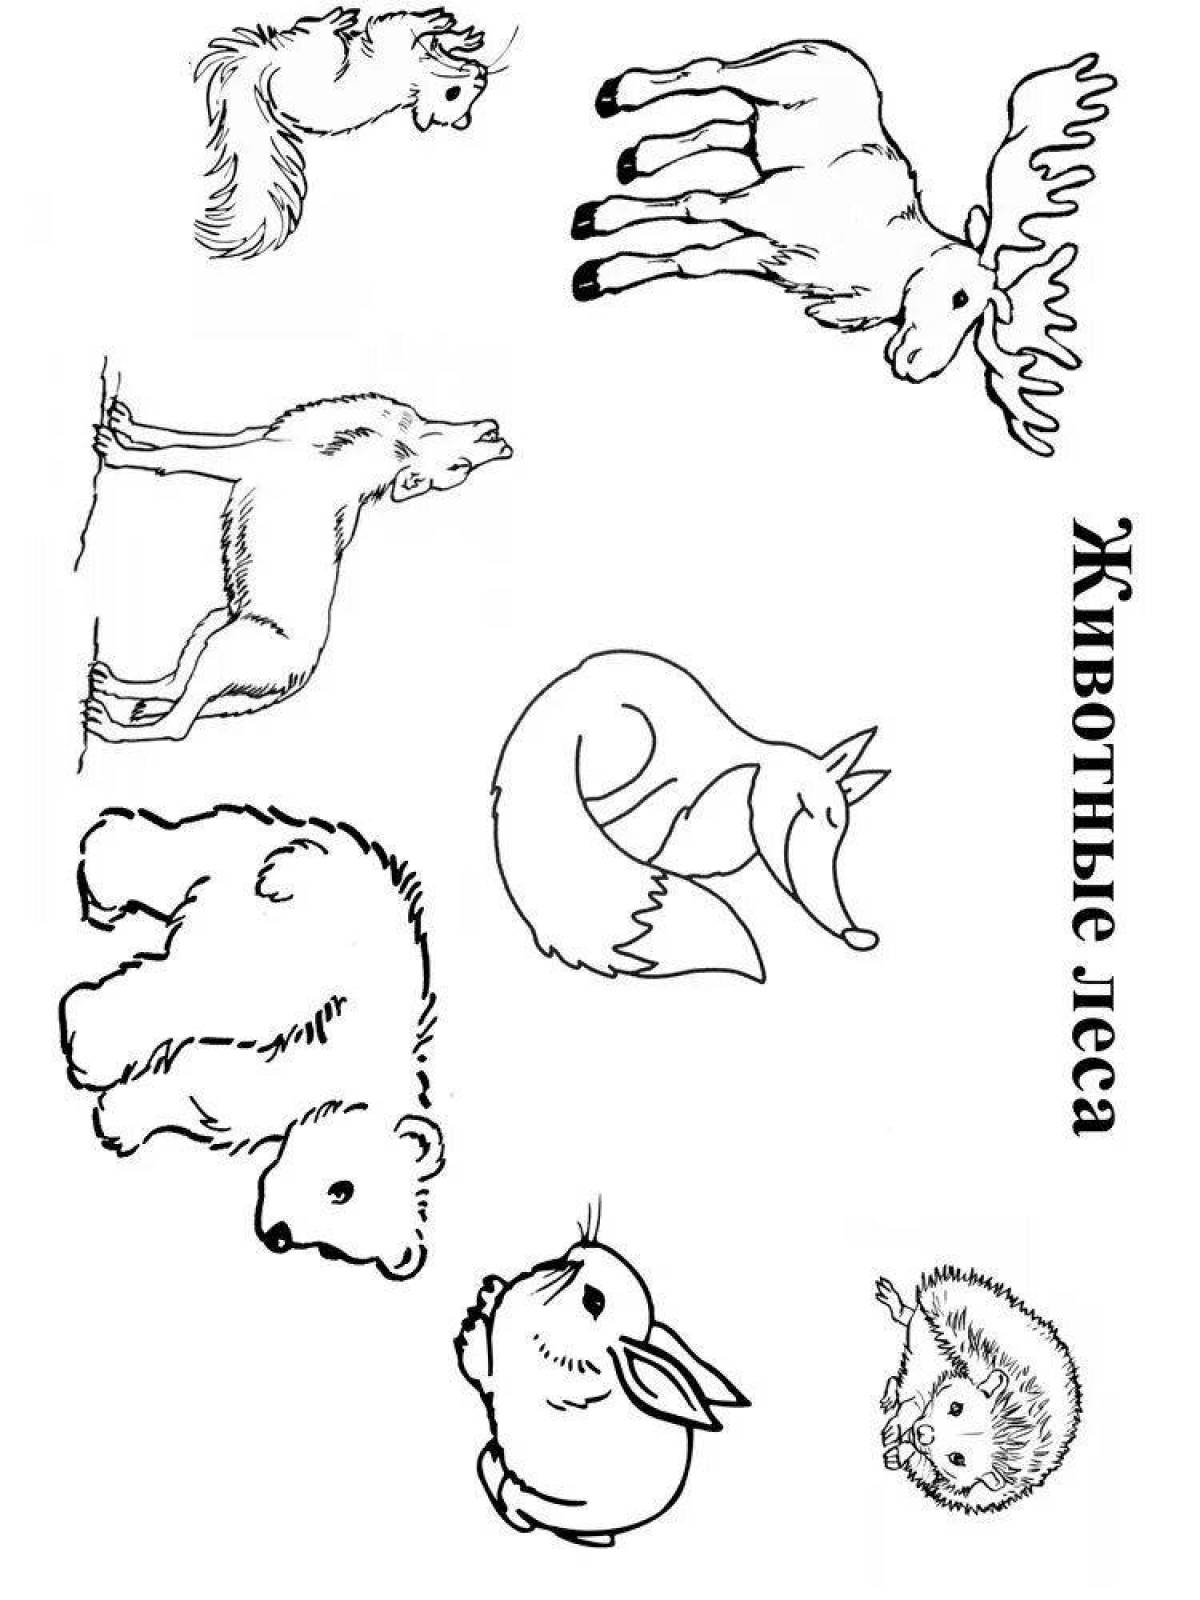 Great coloring book for kids wild animals 2 3 years old